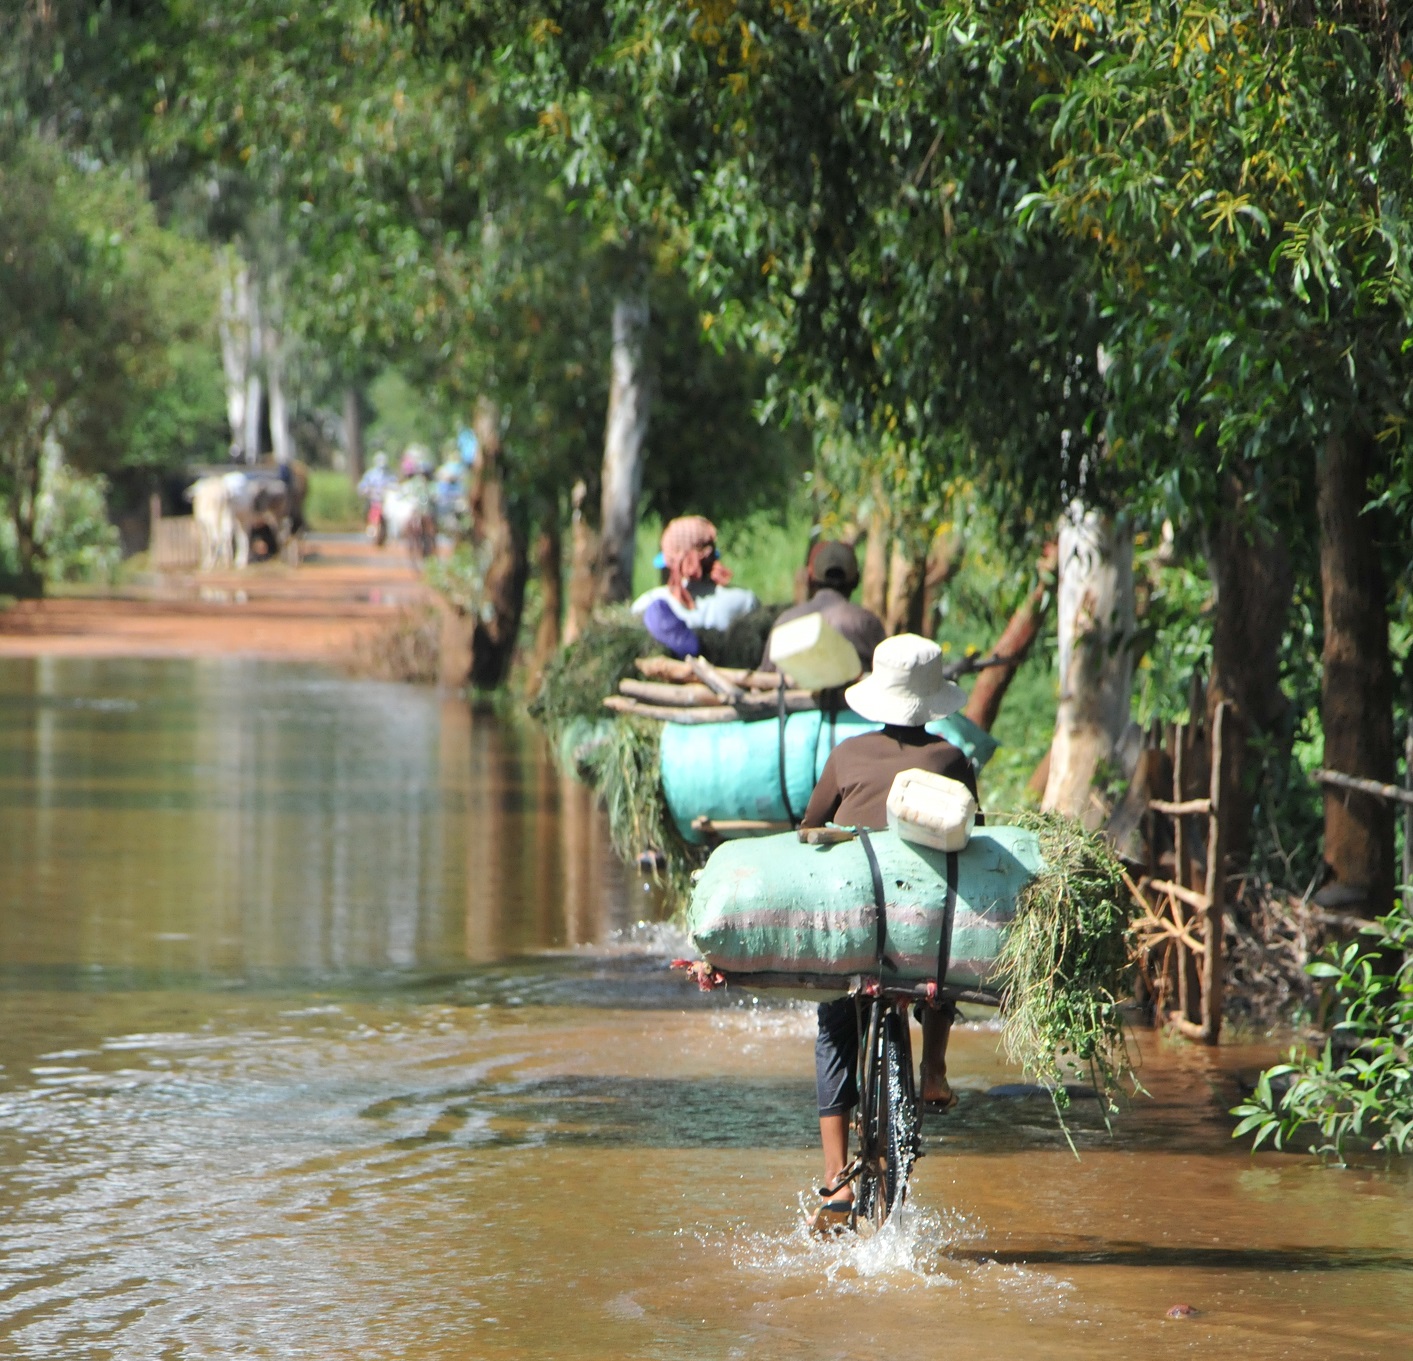 Cylclists in Cambodia Floods